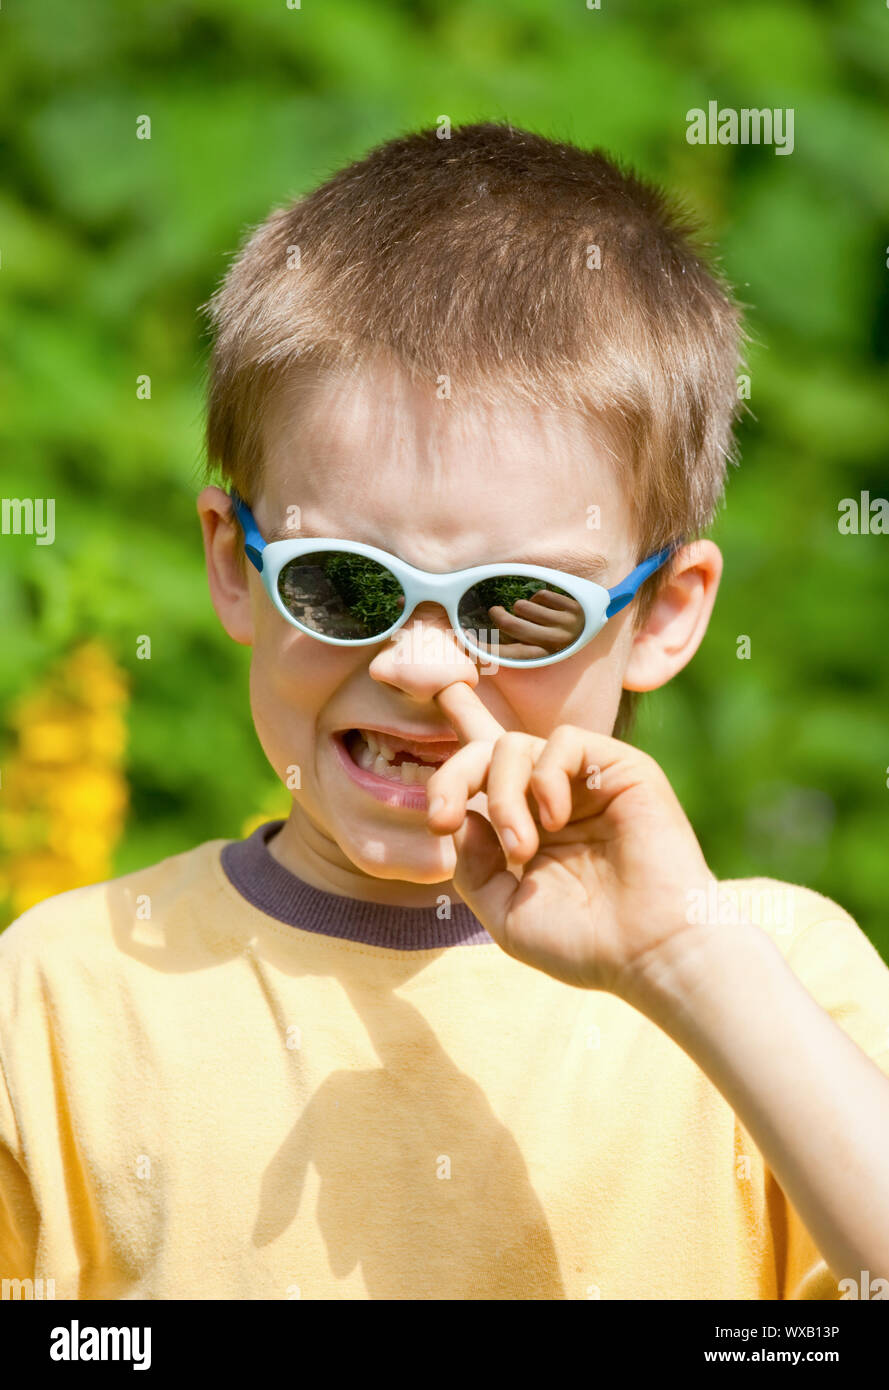 Portrait of a young boy wearing sunglasses picking his nose Stock Photo